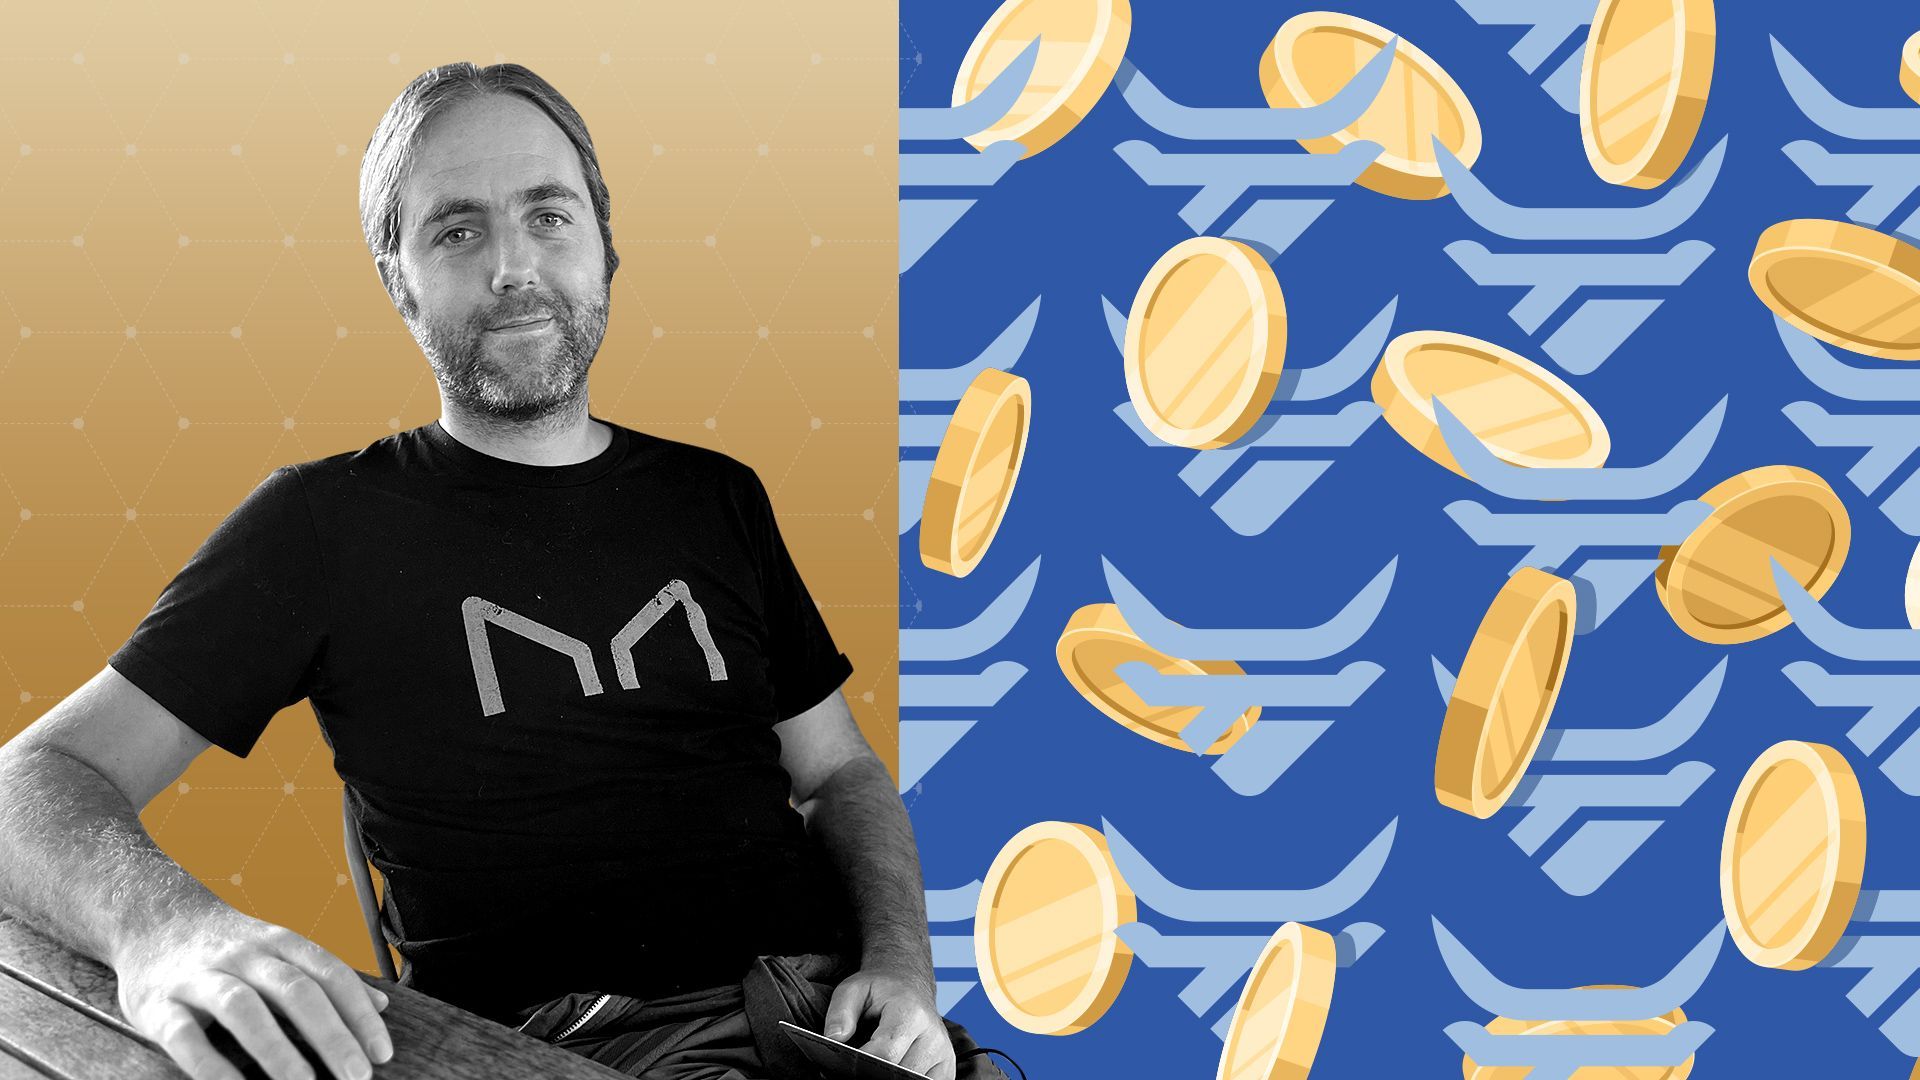 Photo illustration of Sébastien Derivaux surrounded by the Steakhouse FInancial logo, falling coins, and abstract patterns. 